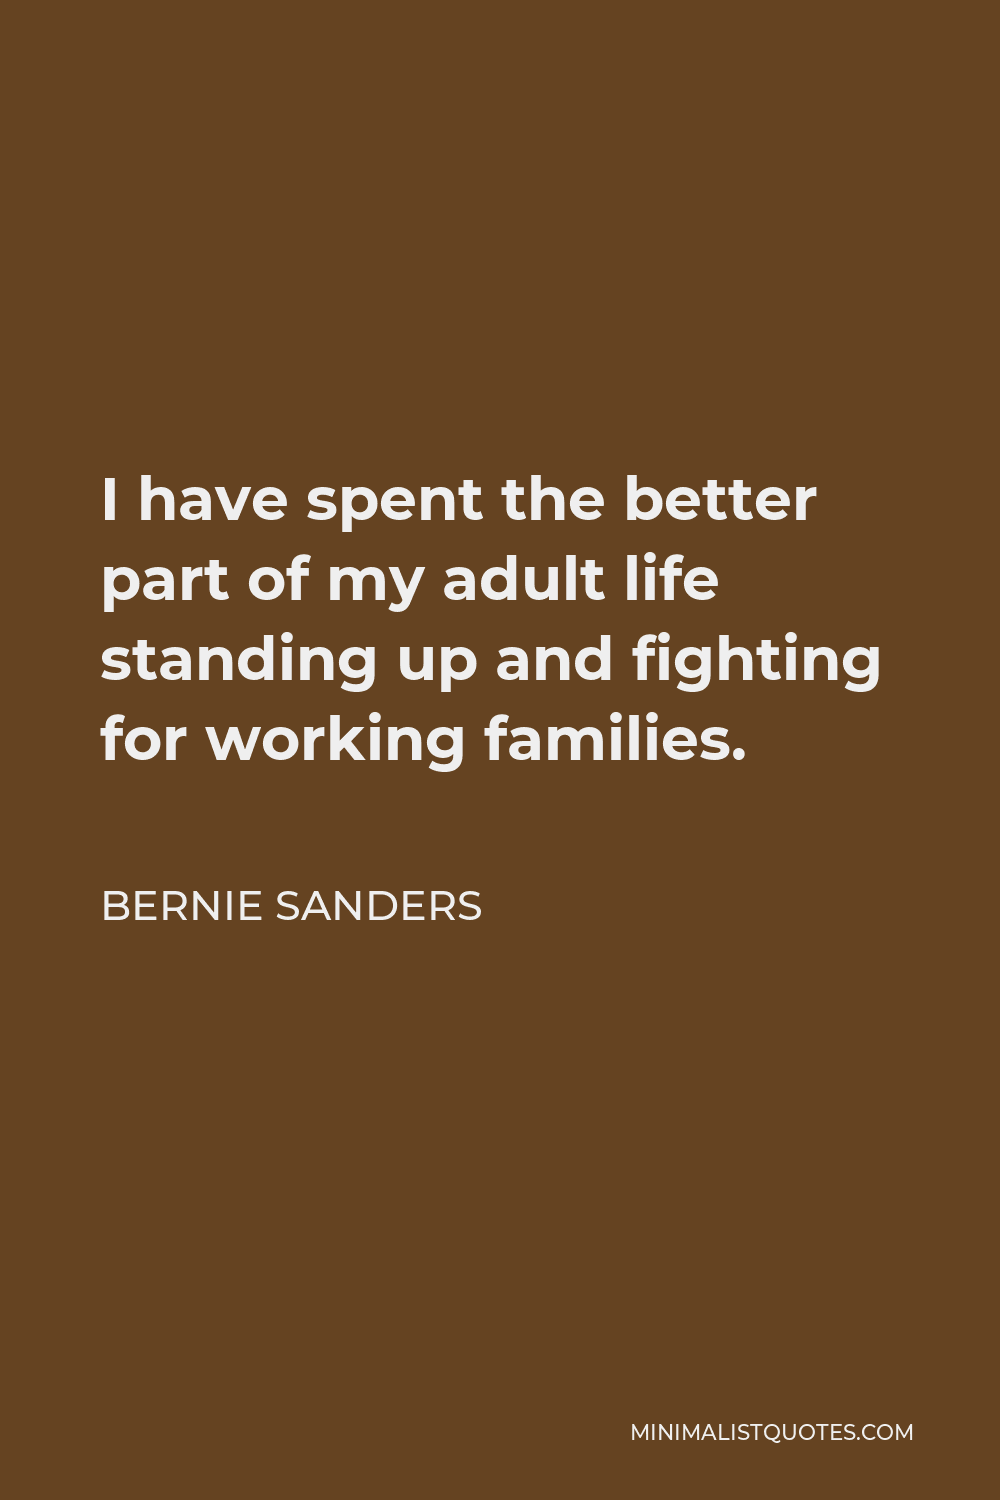 Bernie Sanders Quote - I have spent the better part of my adult life standing up and fighting for working families.